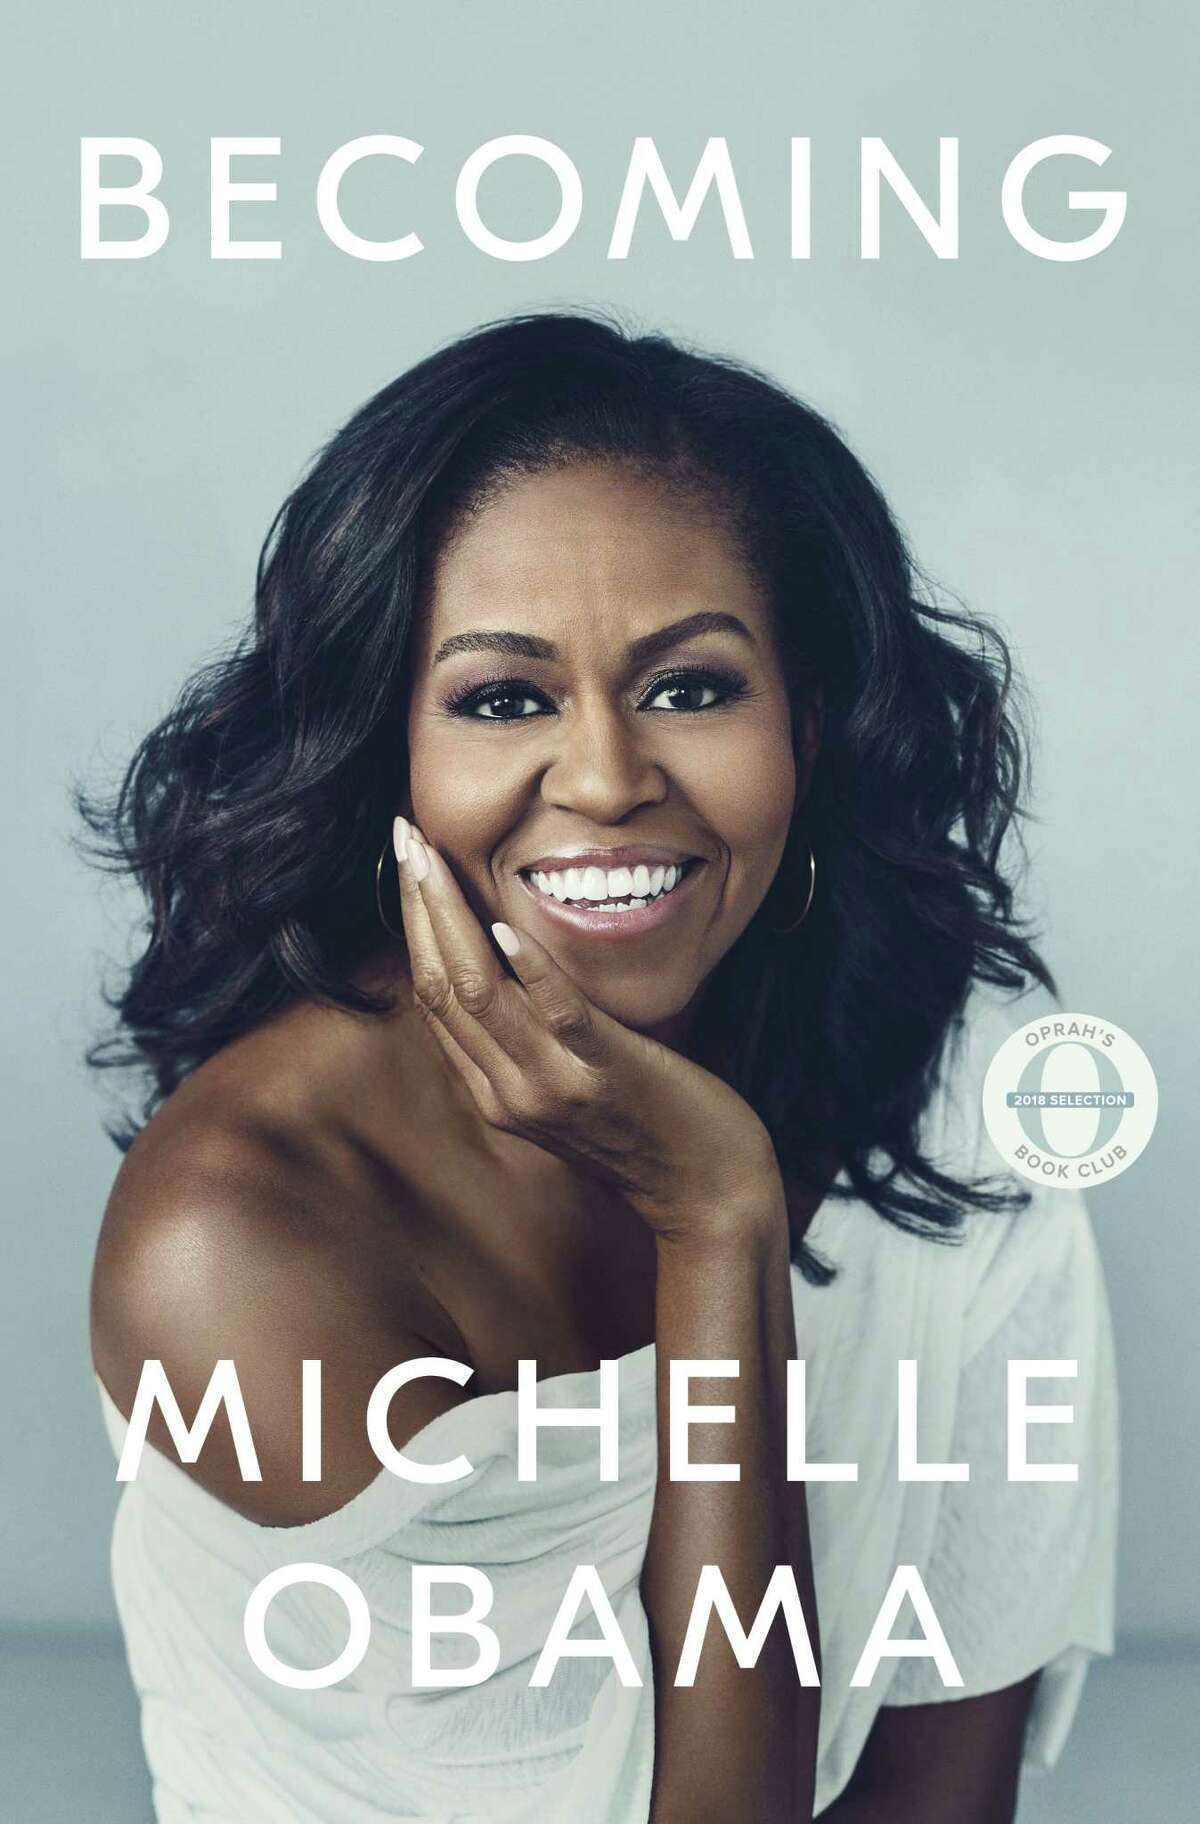 Michelle Obama's "Becoming," just released by Crown Publishing Group, has been selected for the Oprah Book Club